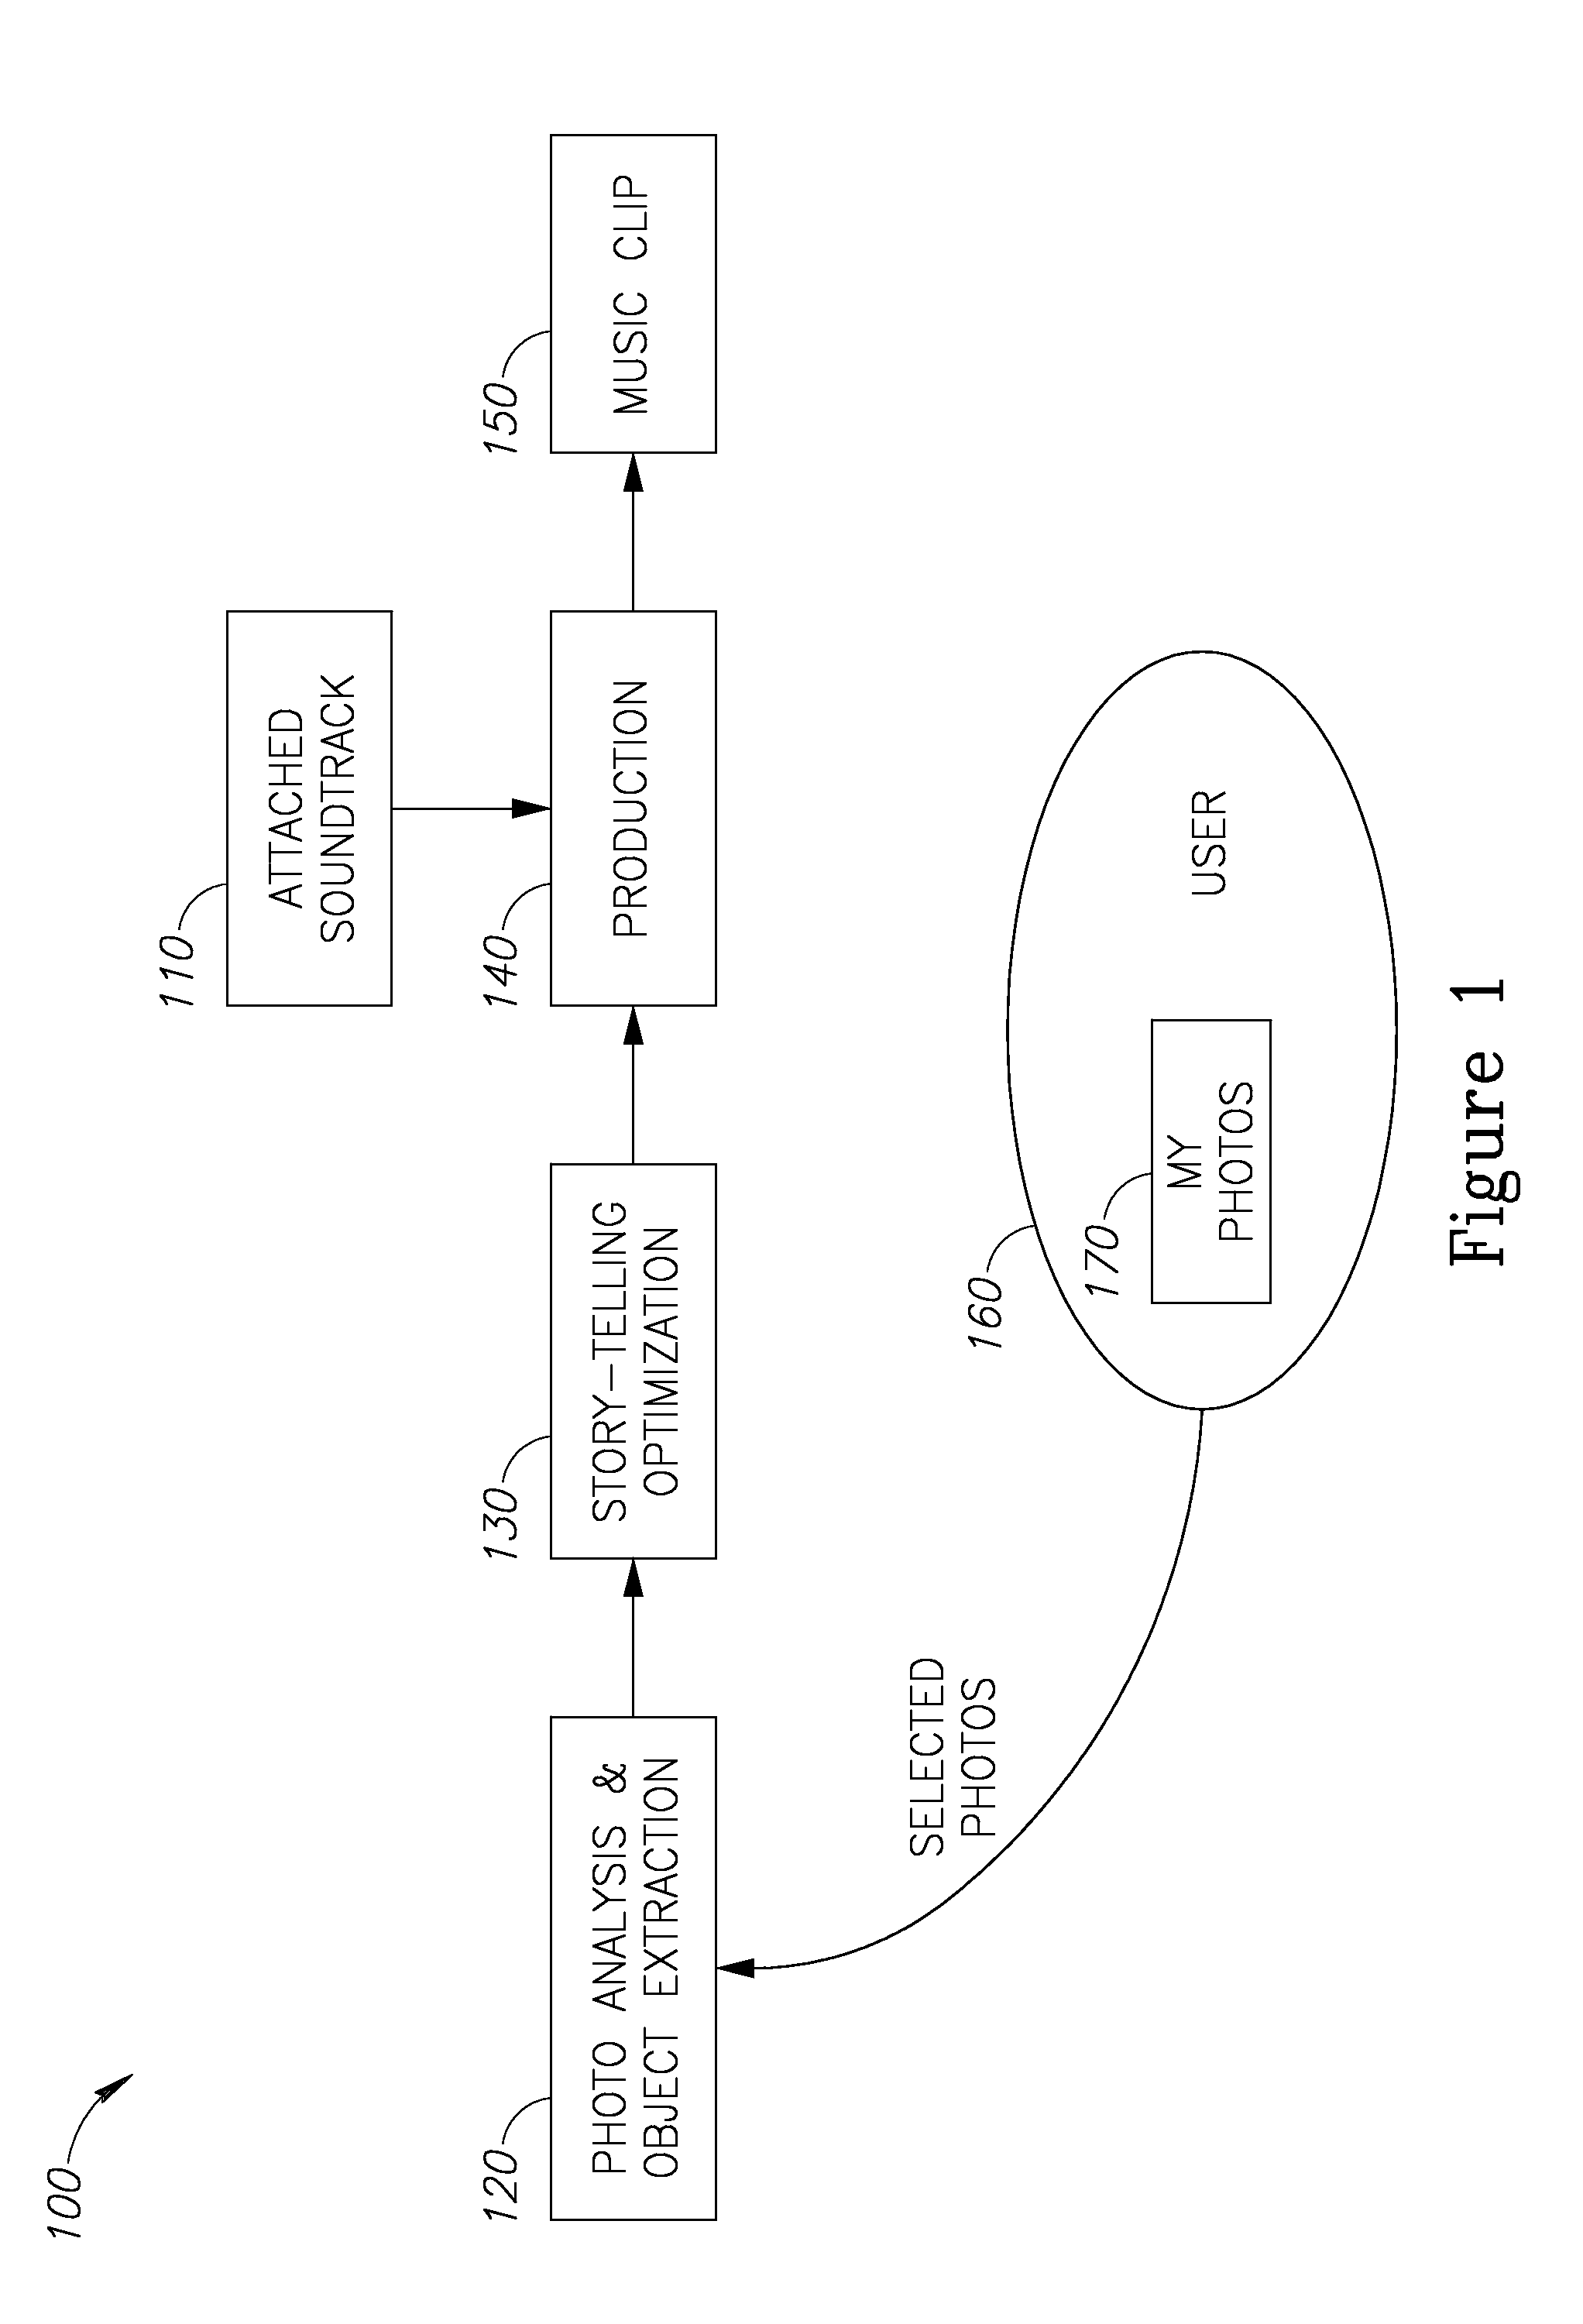 Method and system for automatic generation of clips from a plurality of images based on an inter-objects relationship score